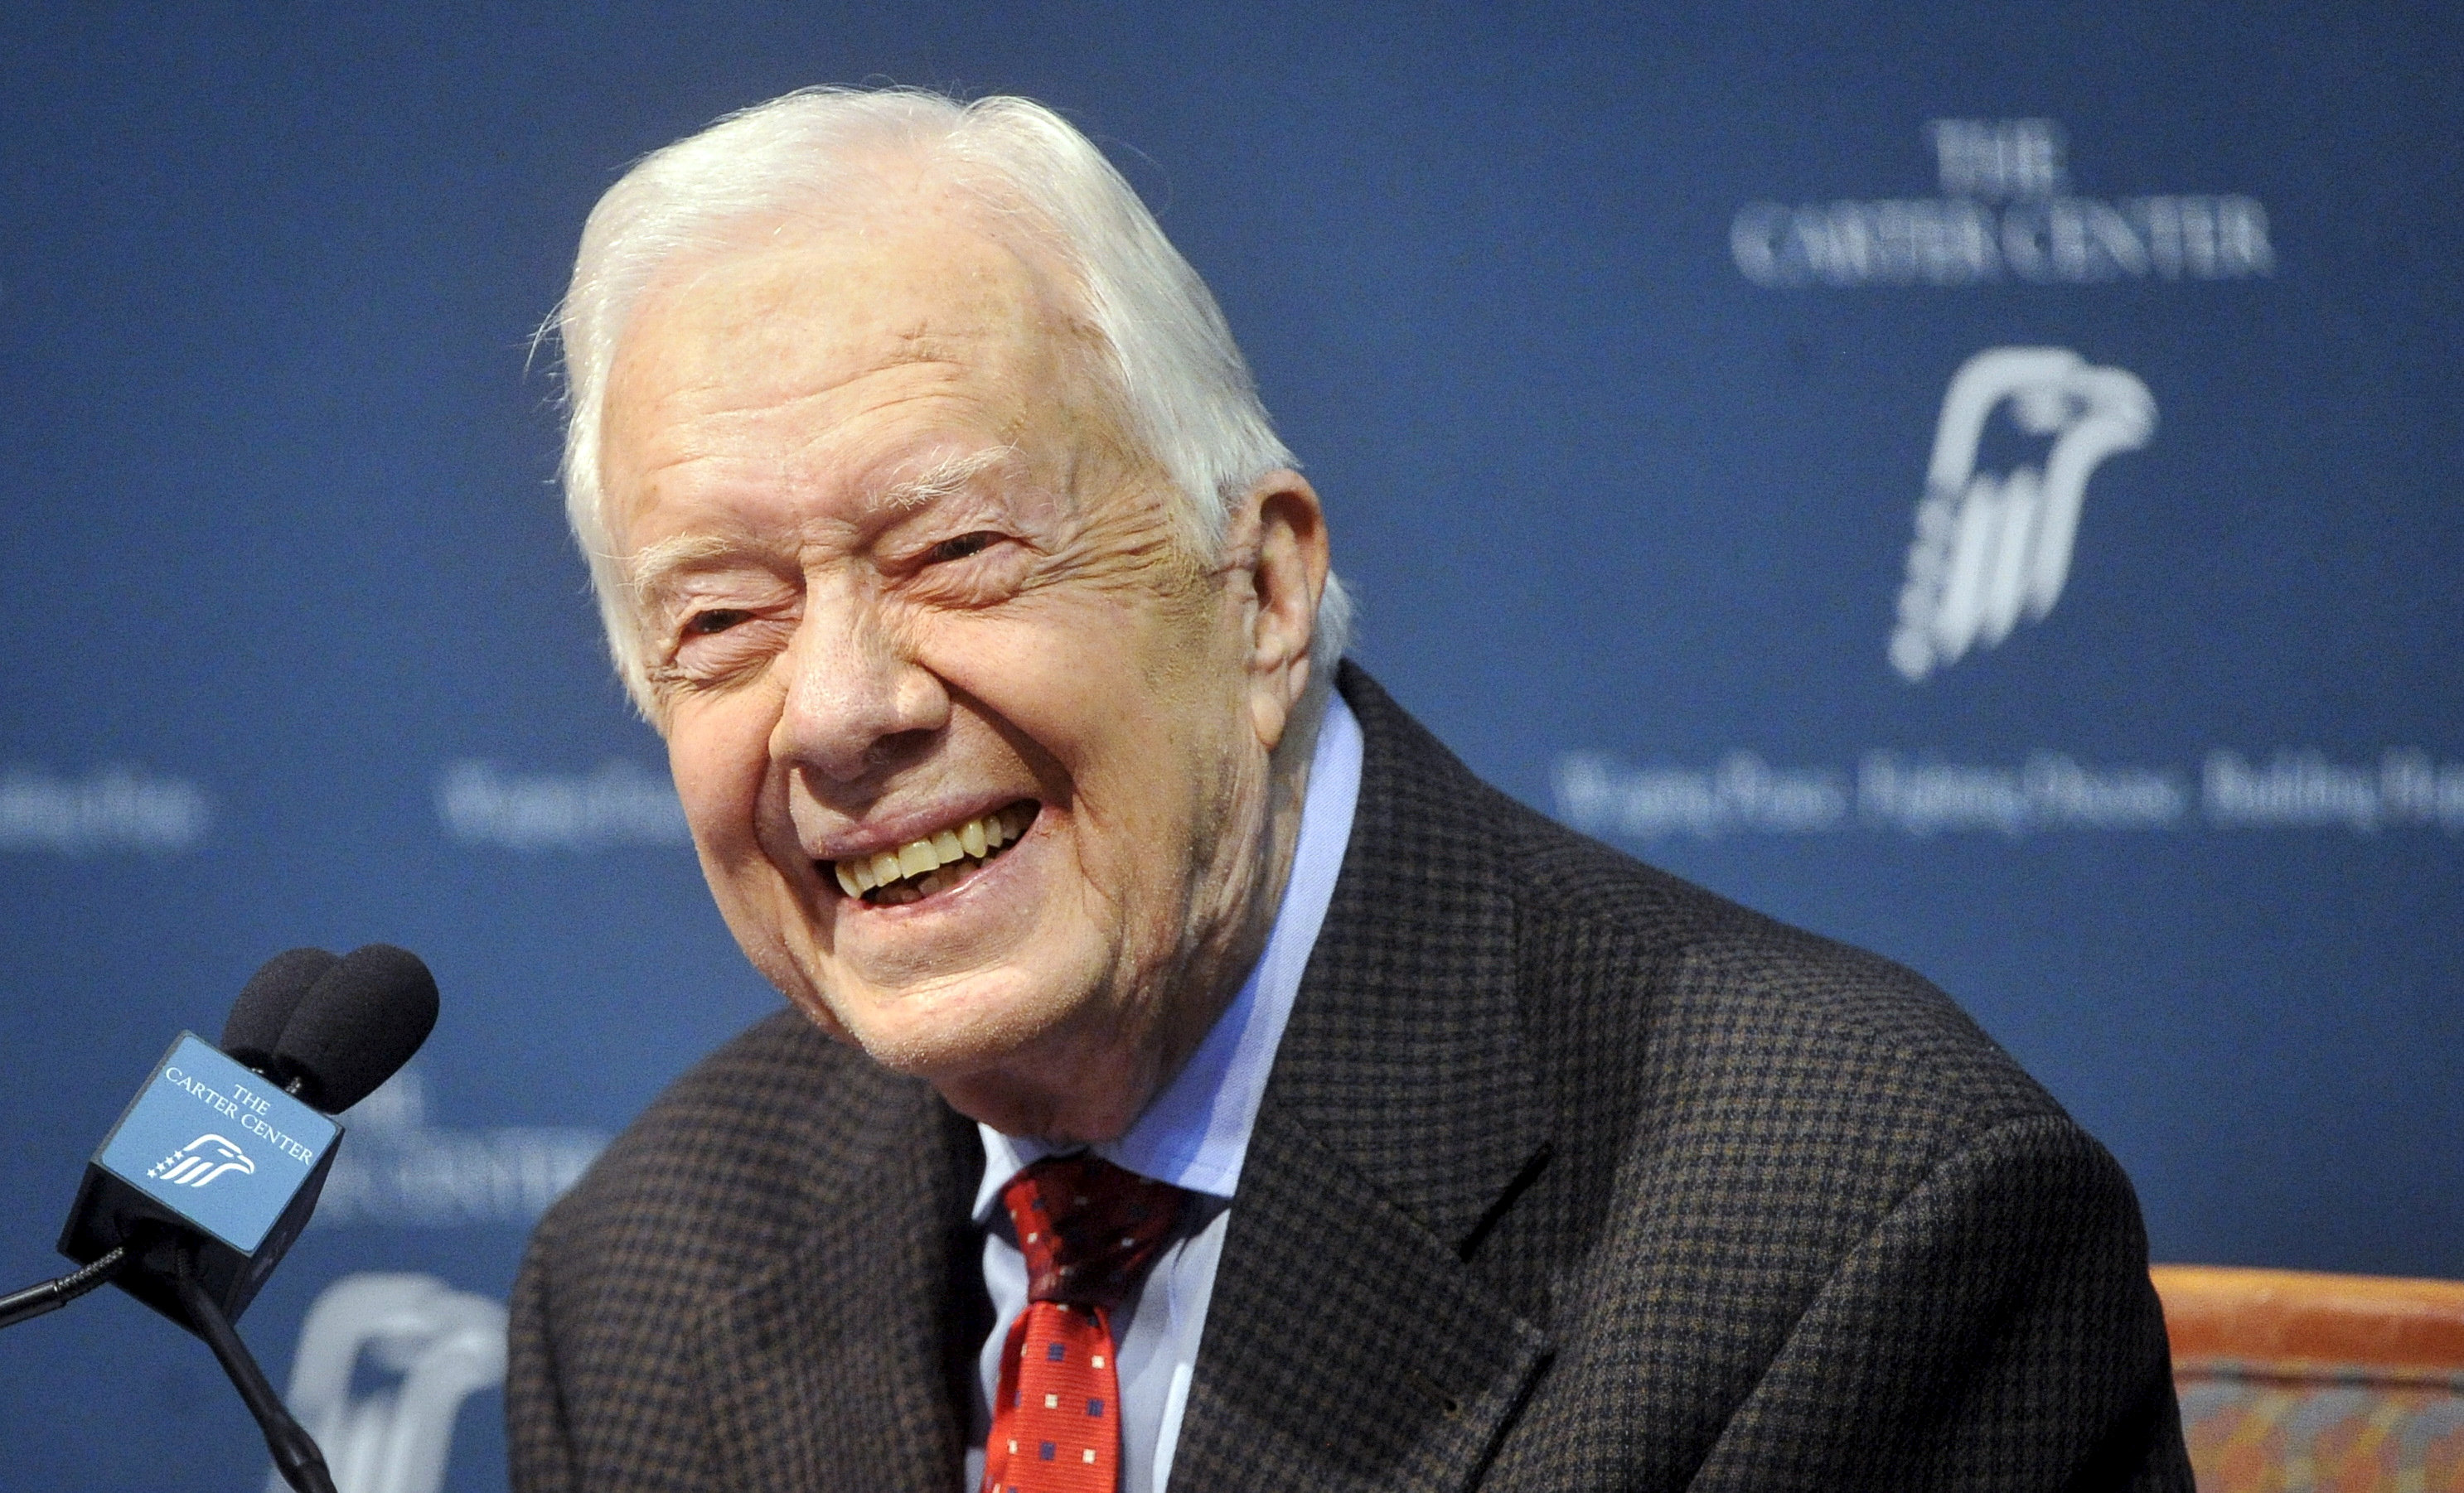 Former U.S. president Jimmy Carter will travel to North Korea to help diffuse tensions